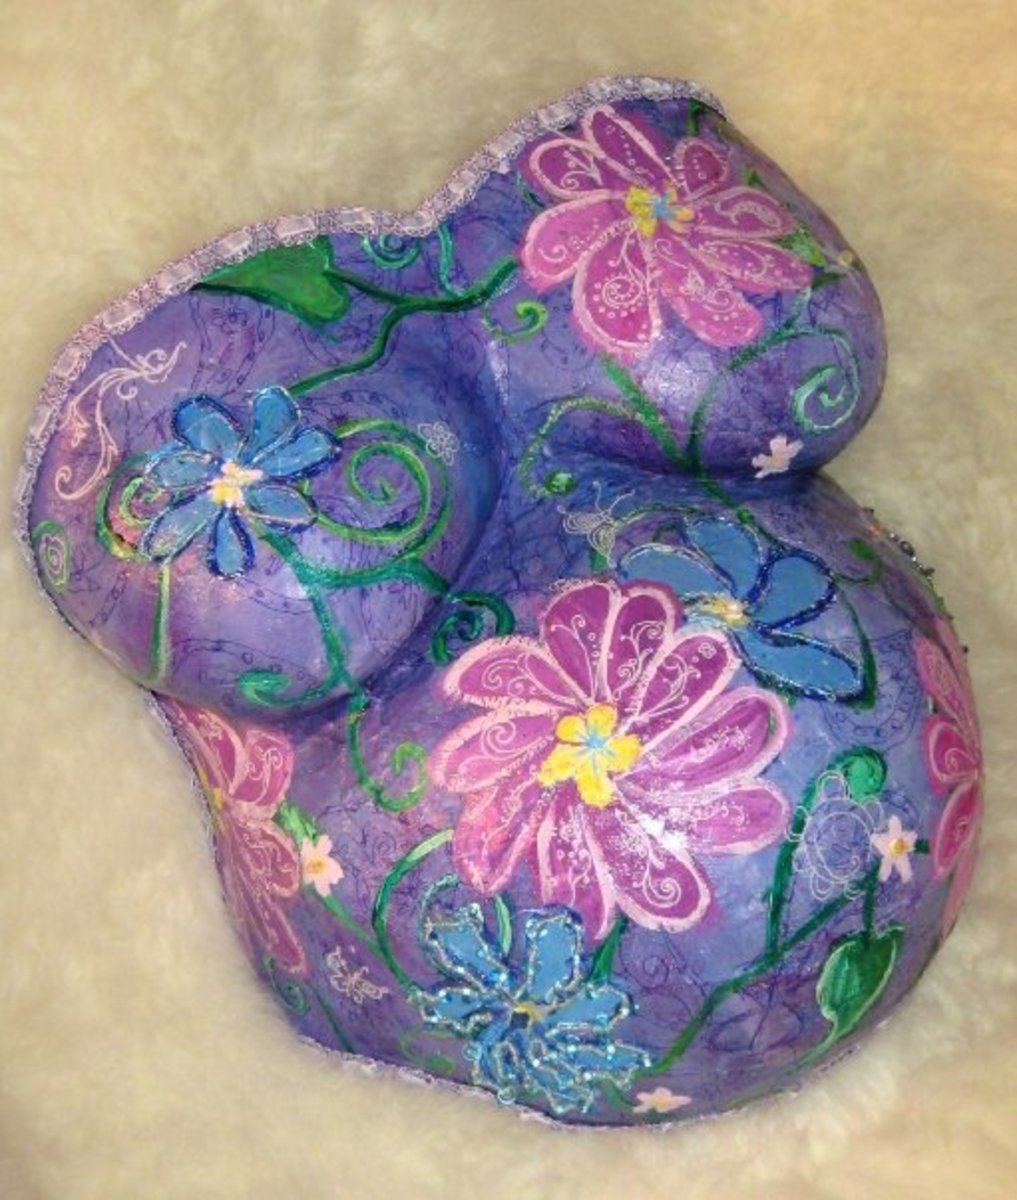 Pregnant Belly Art: How to Make A Belly Cast, Instructions, Ideas, and Examples Included.